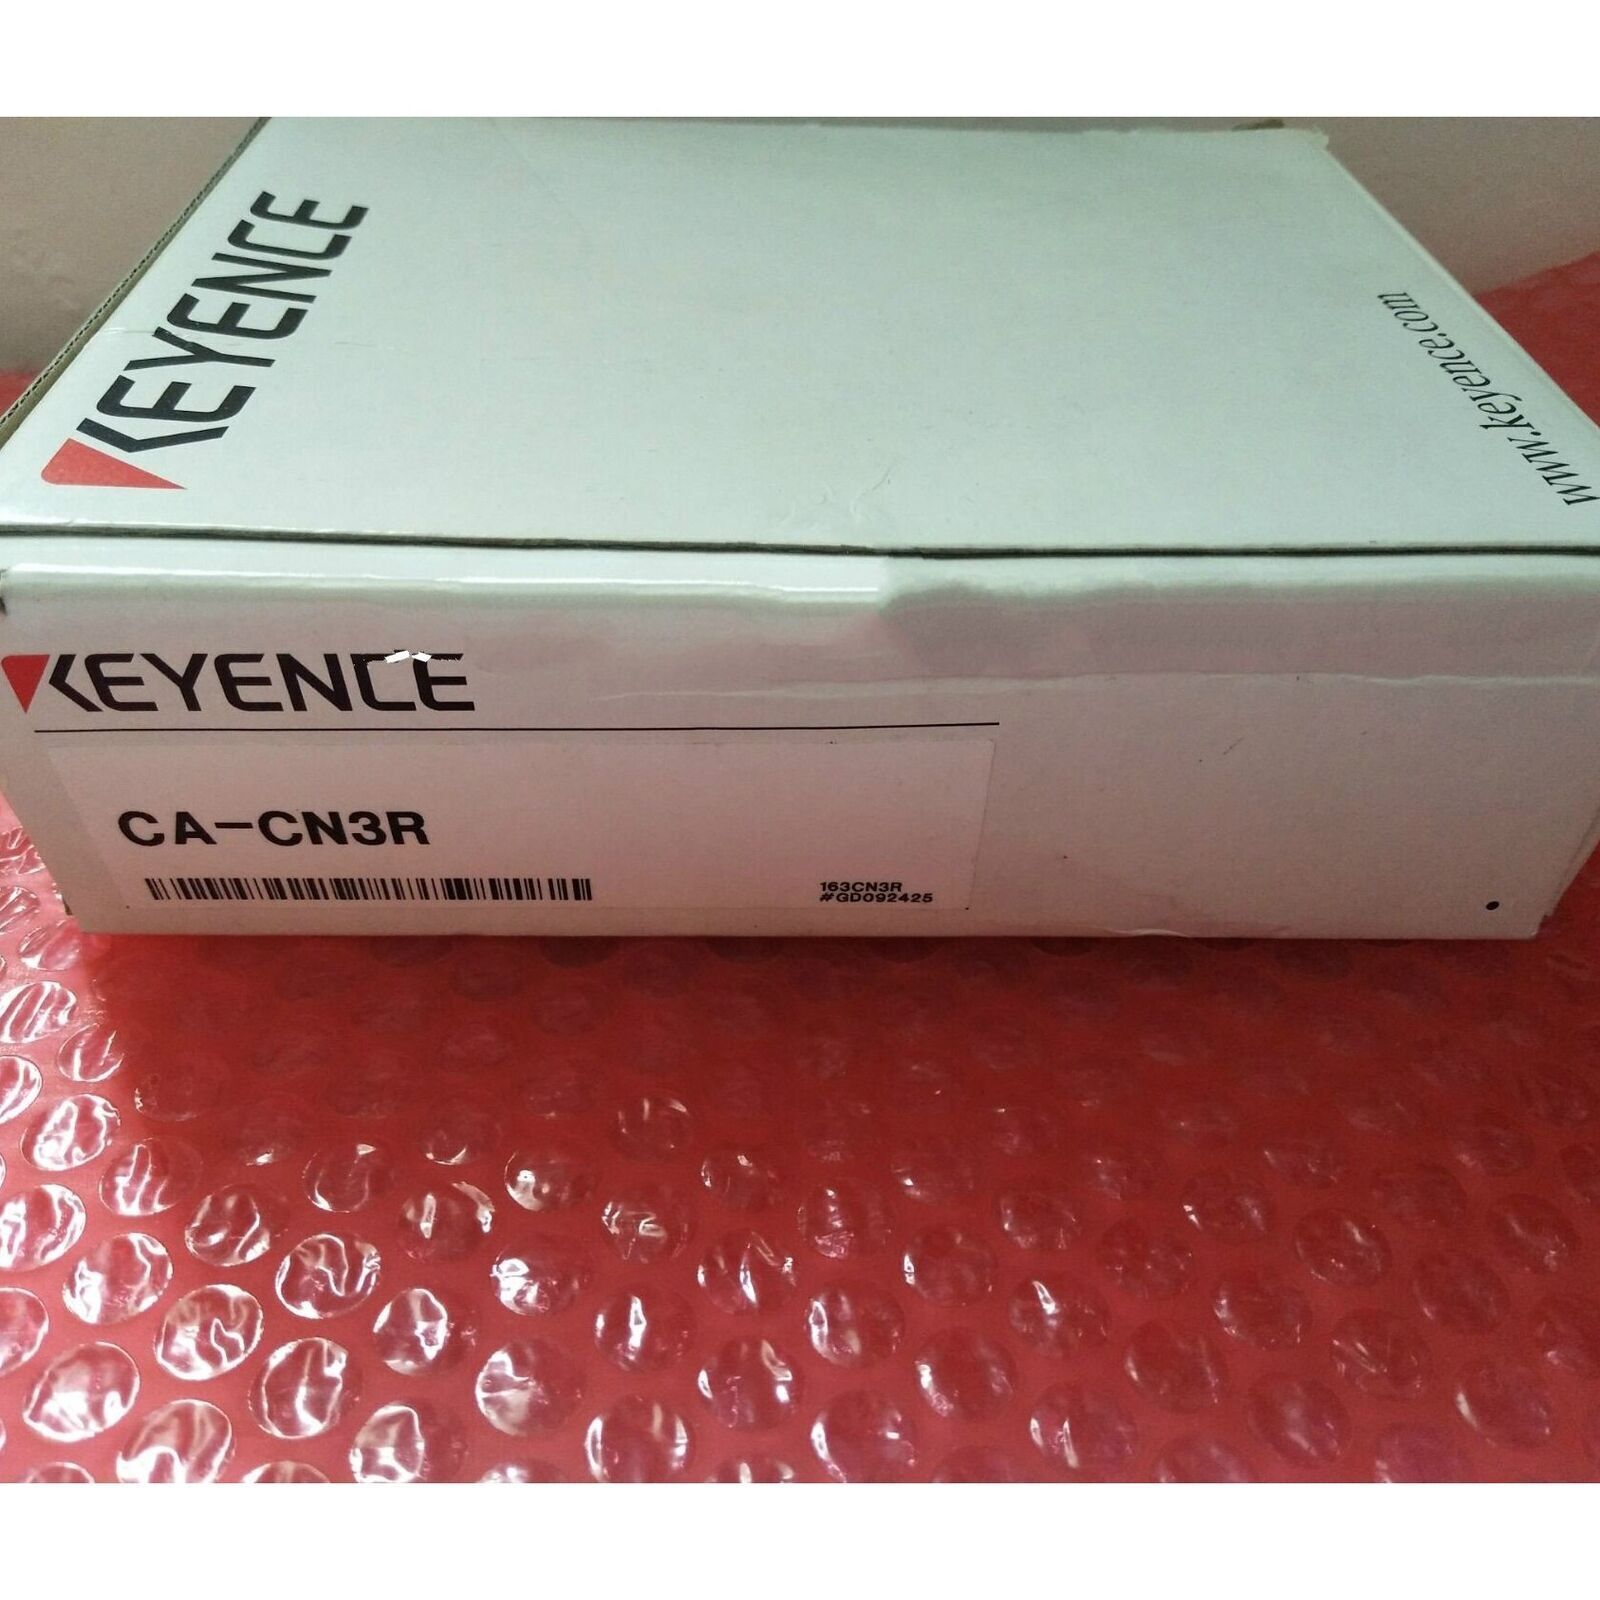 CA-CN3R KEYENCE Vision System Fast Delivery Cable Connection New Spot Goods#HT